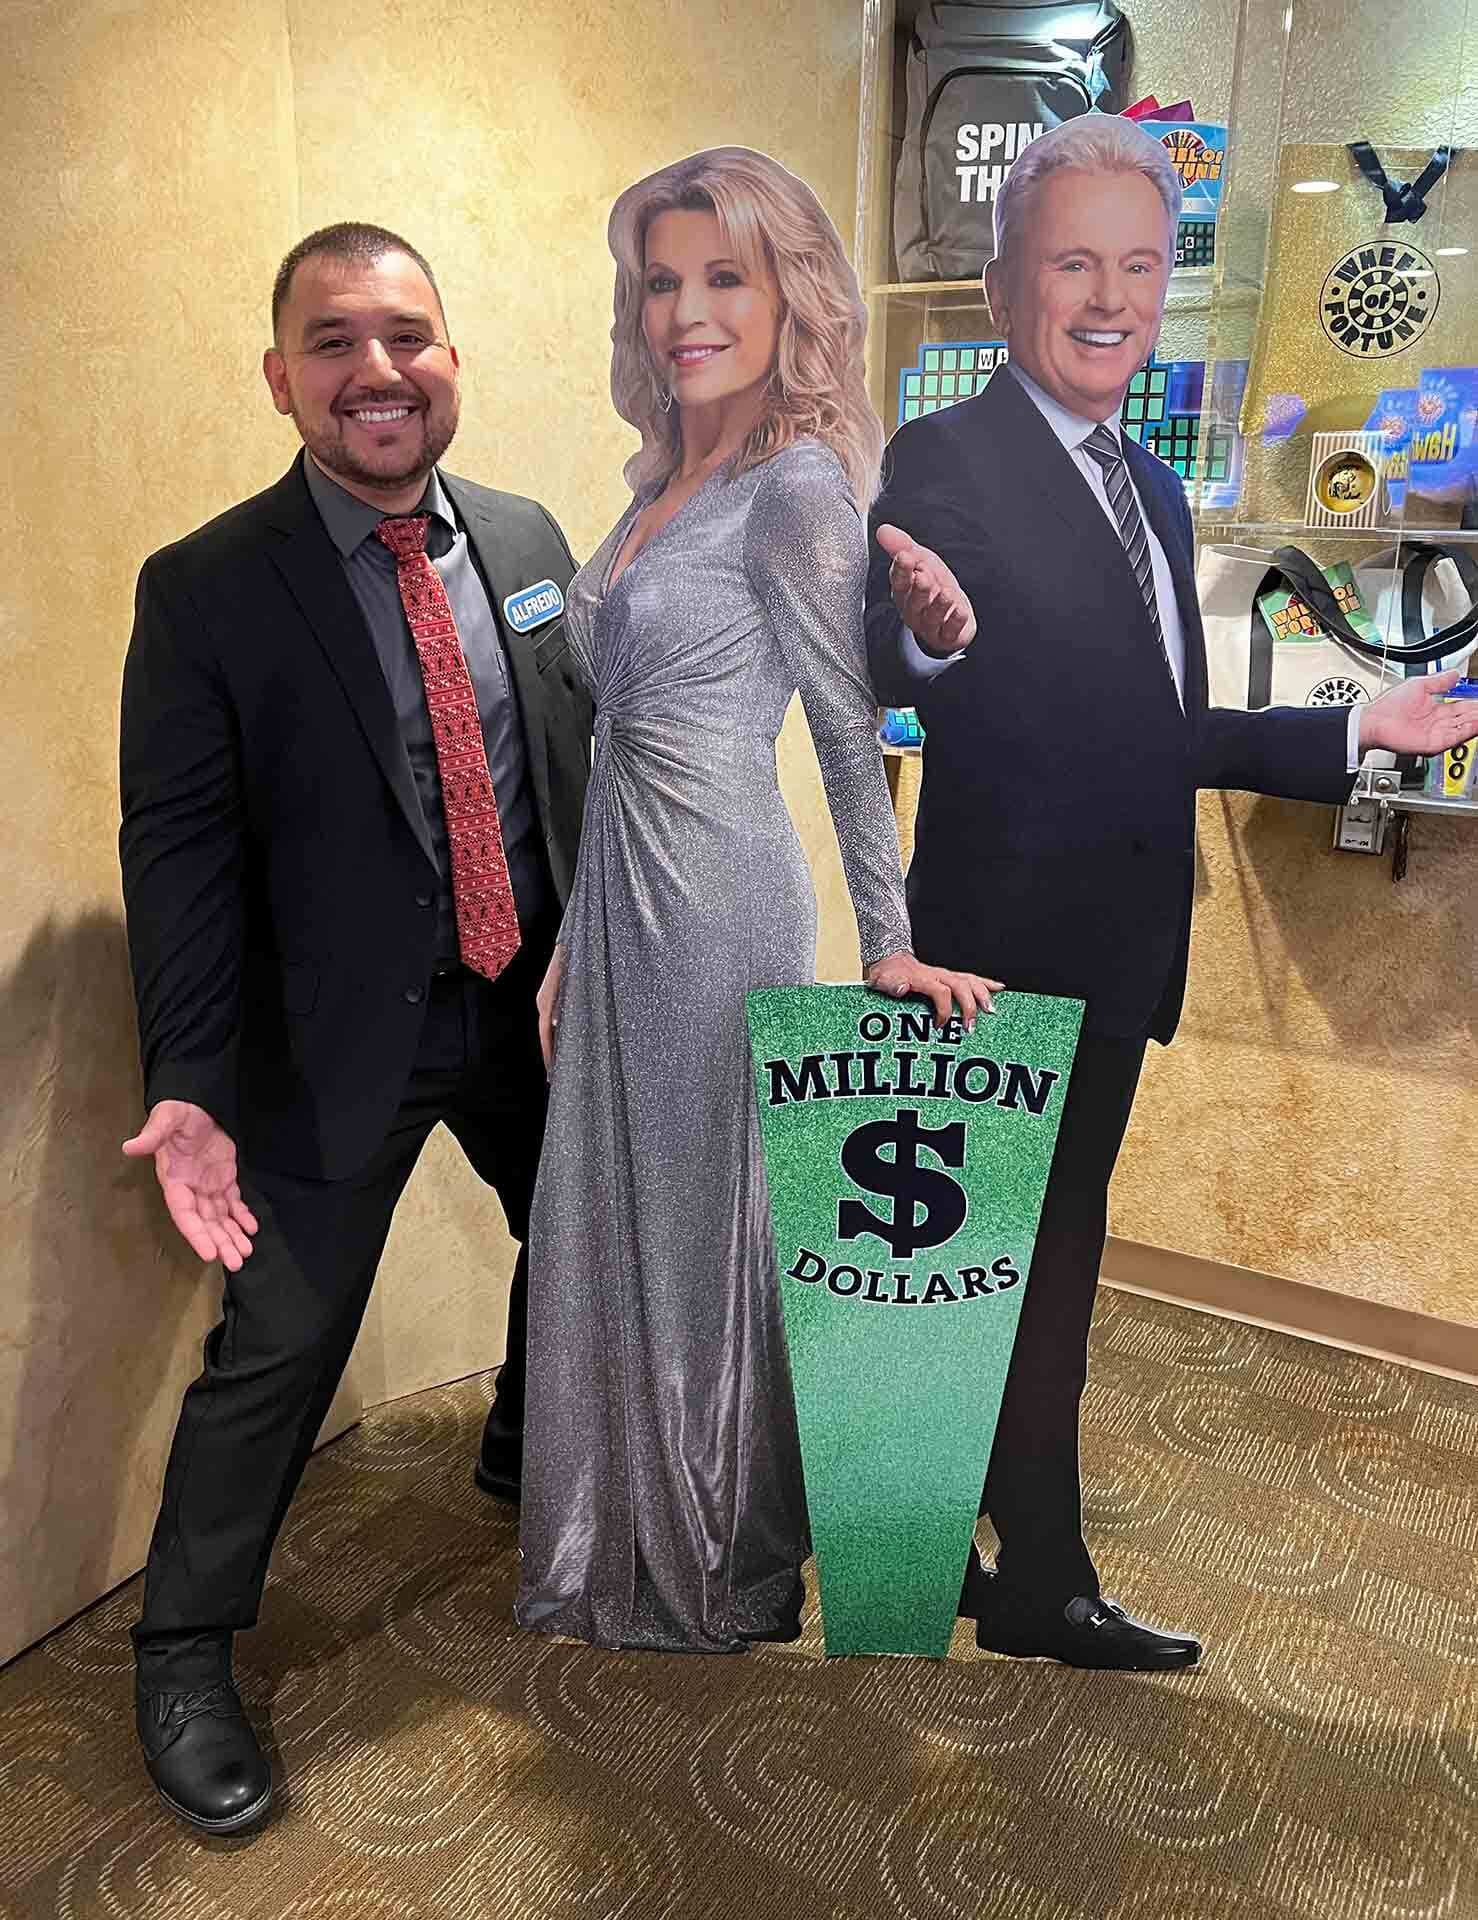 Alfredo Oliveira with cut-outs of Vanna White and Pat Sajak